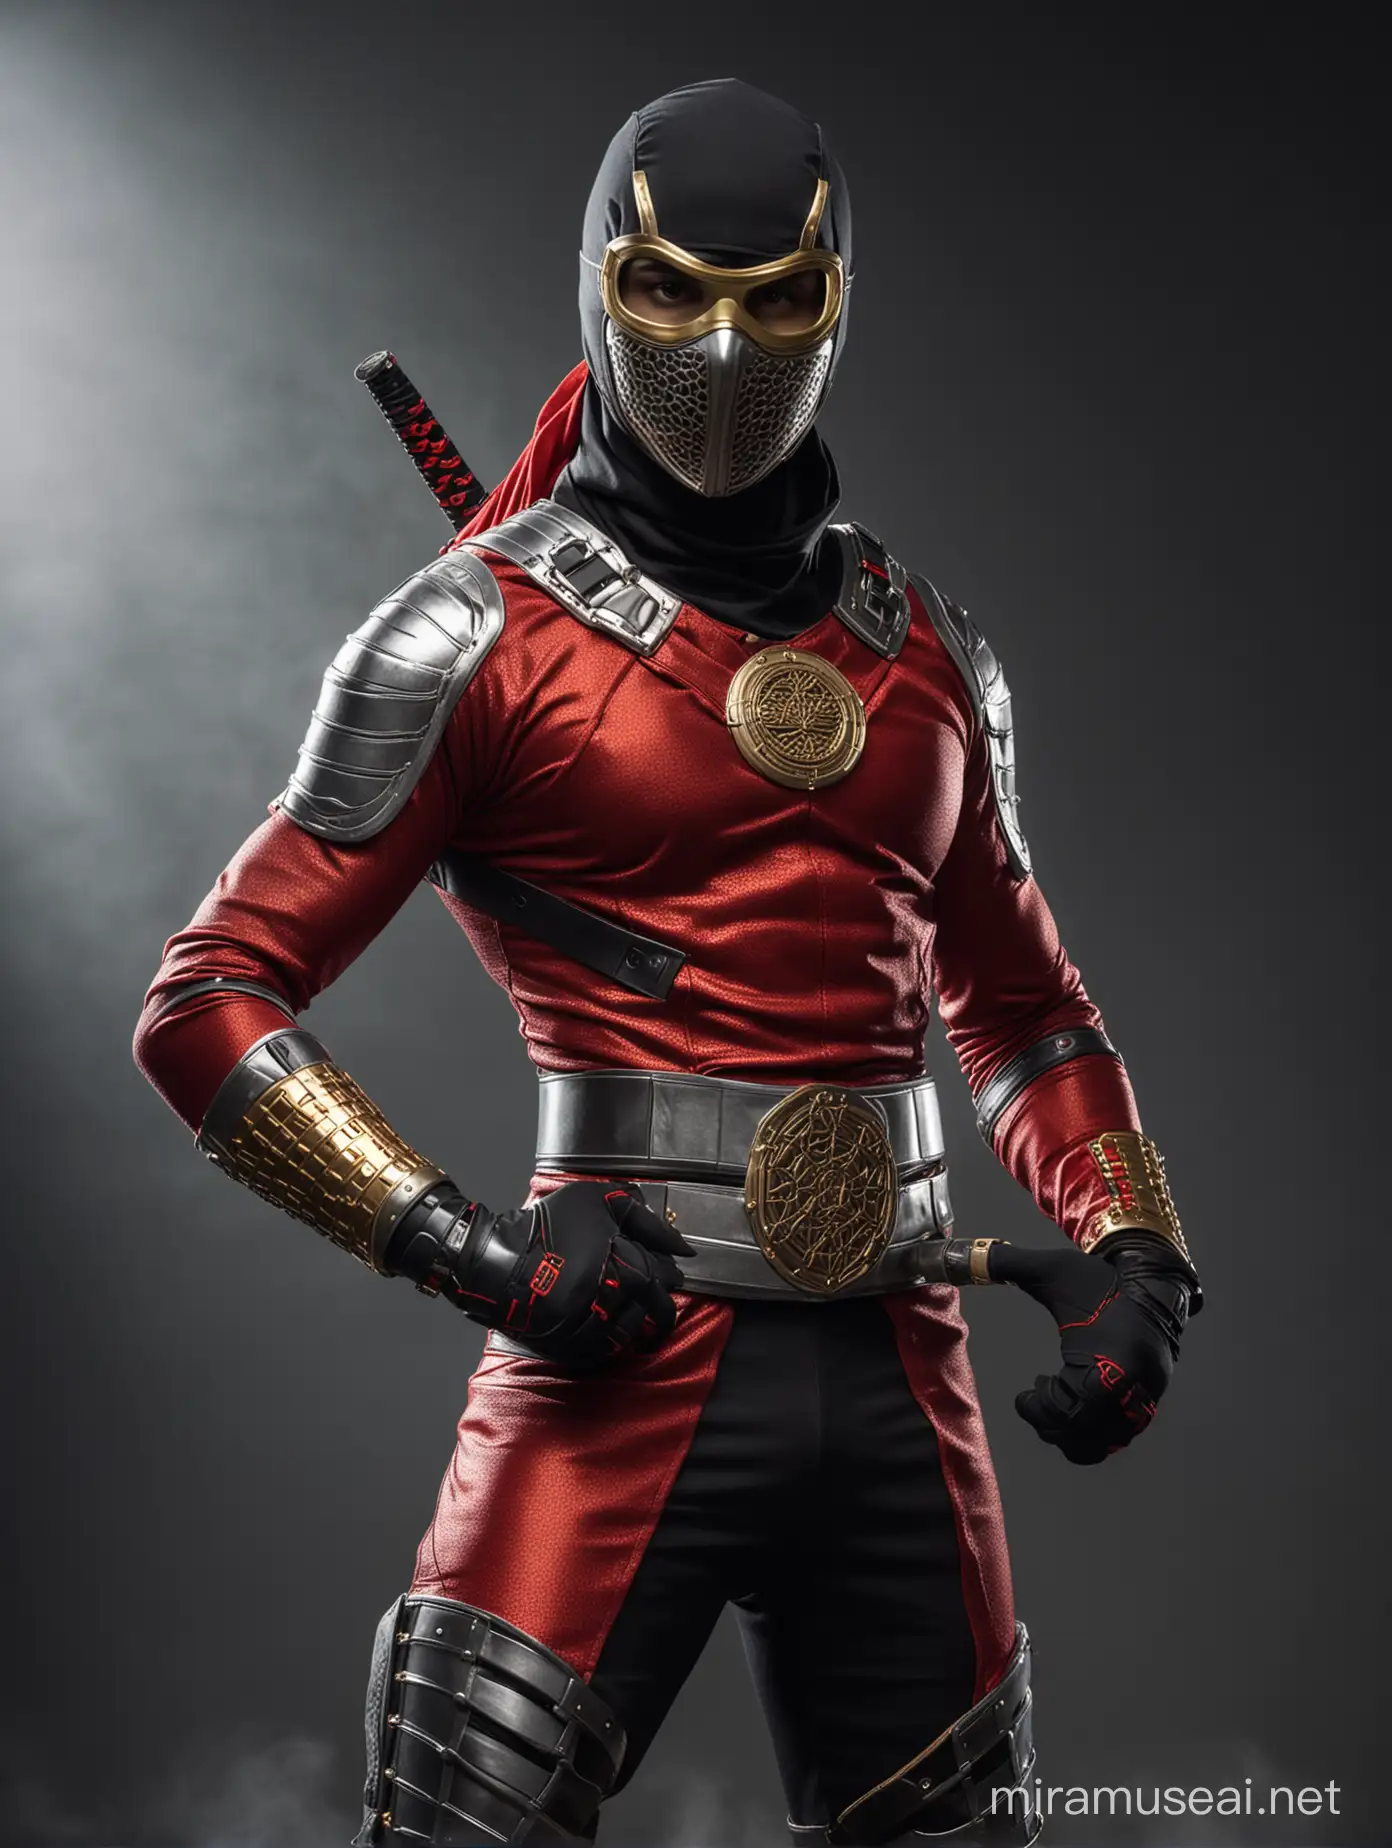 Sleek Urban Ninja in Red and Silver with Gold Accents